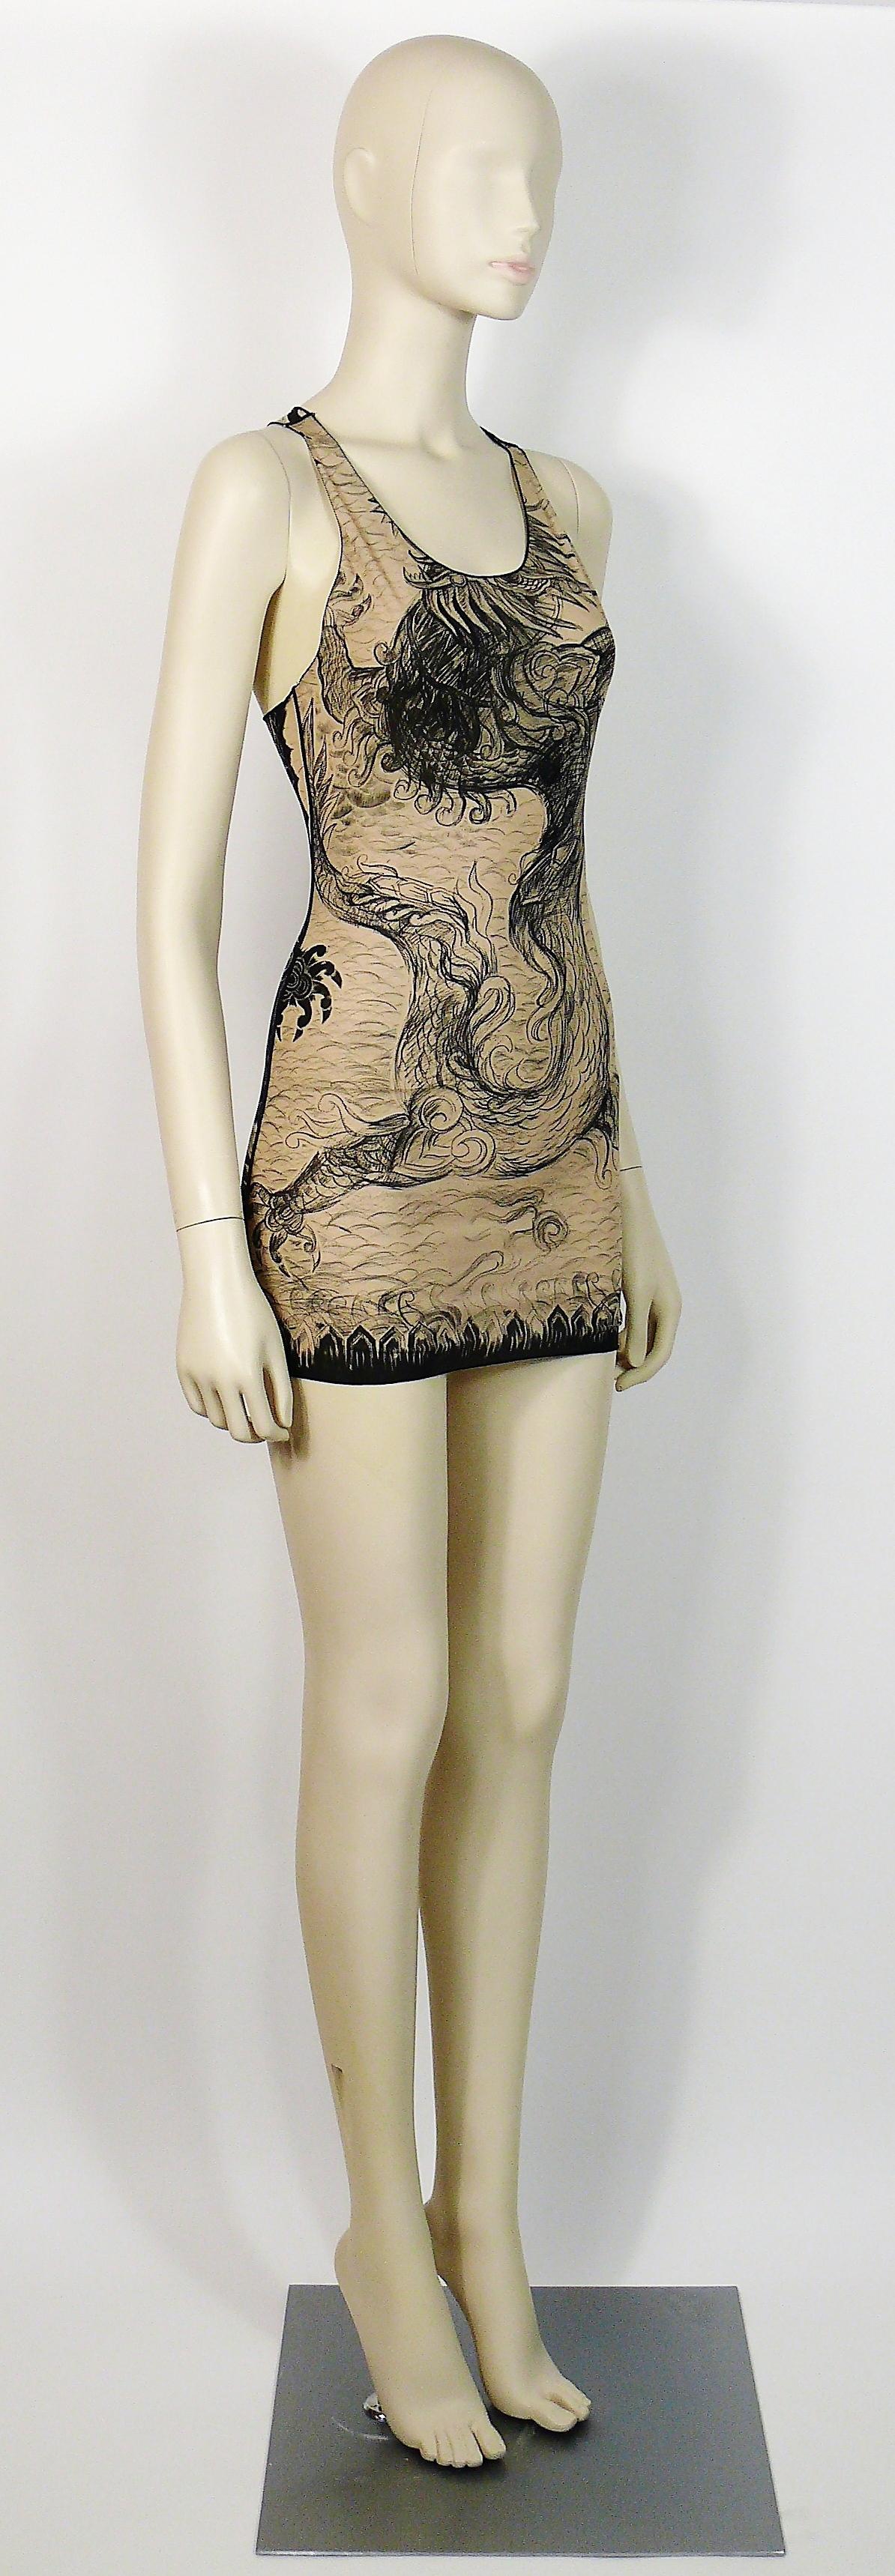 JEAN PAUL GAULTIER stretchy sheer tank mini dress featuring a black Japanese dragon inspired tattoo print.

Label reads JEAN PAUL GAULTIER Femme Made in Italy.

Size tag reads : I 42 / D 38 / F 38 / GB 10 / USA 8.
Please refer to